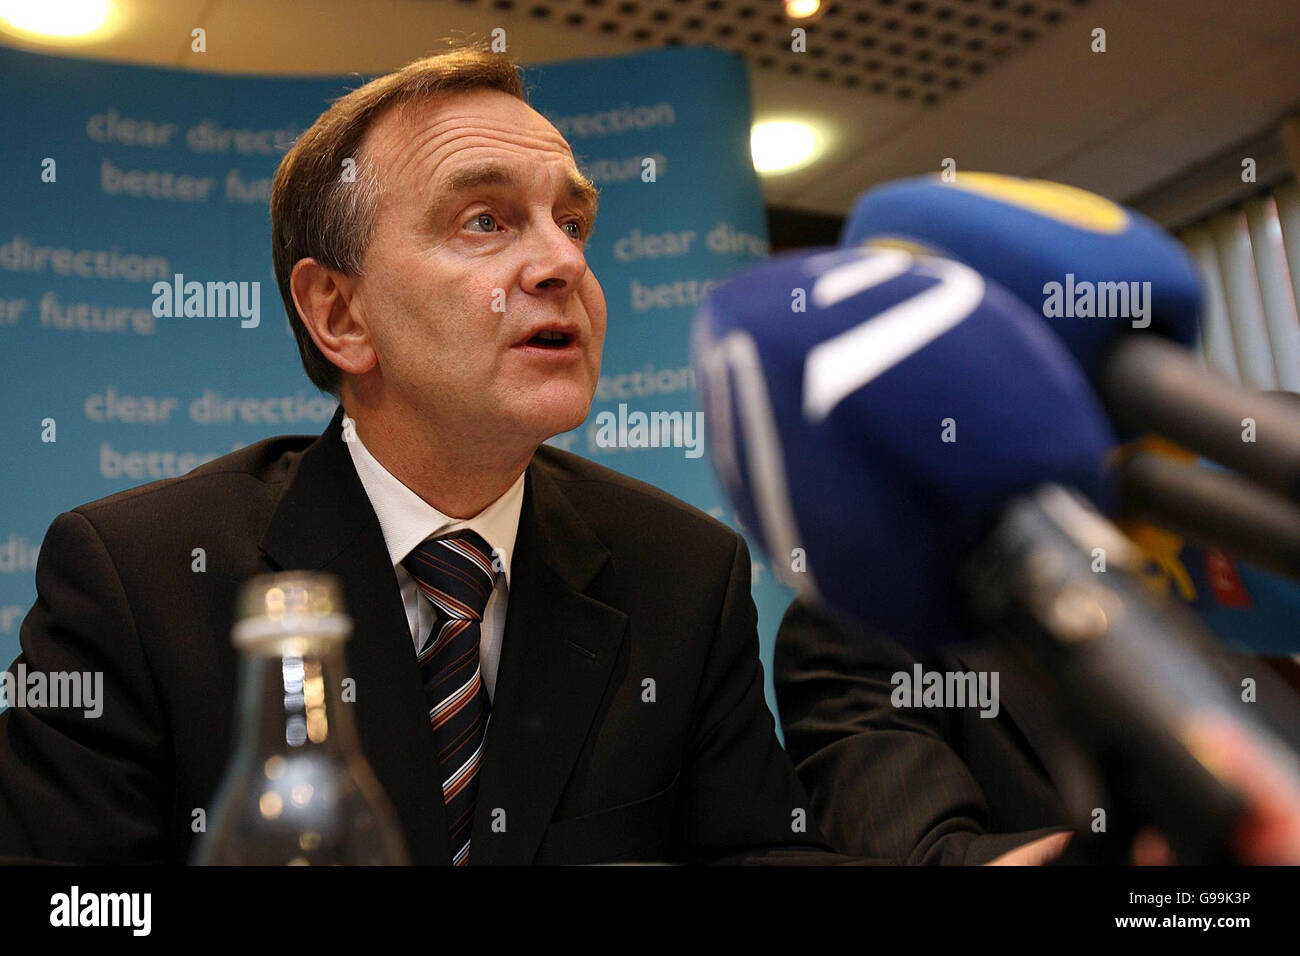 Transport Minister Martin Cullen at a press conference in the Department of Transport, Tuesday April 4, 2006. The Irish Government is to sell a majority stake in national airline Aer Lingus, it was confirmed tonight. After years of speculation, the Transport Minister announced work on the process to float up to 59.9% of the company on the stock exchange would begin immediately despite the continued opposition of trade unions. See PA story IRISH Airline. PRESS ASSOCIATION Photo. Photo credit should read: Julien Behal/PA. Stock Photo